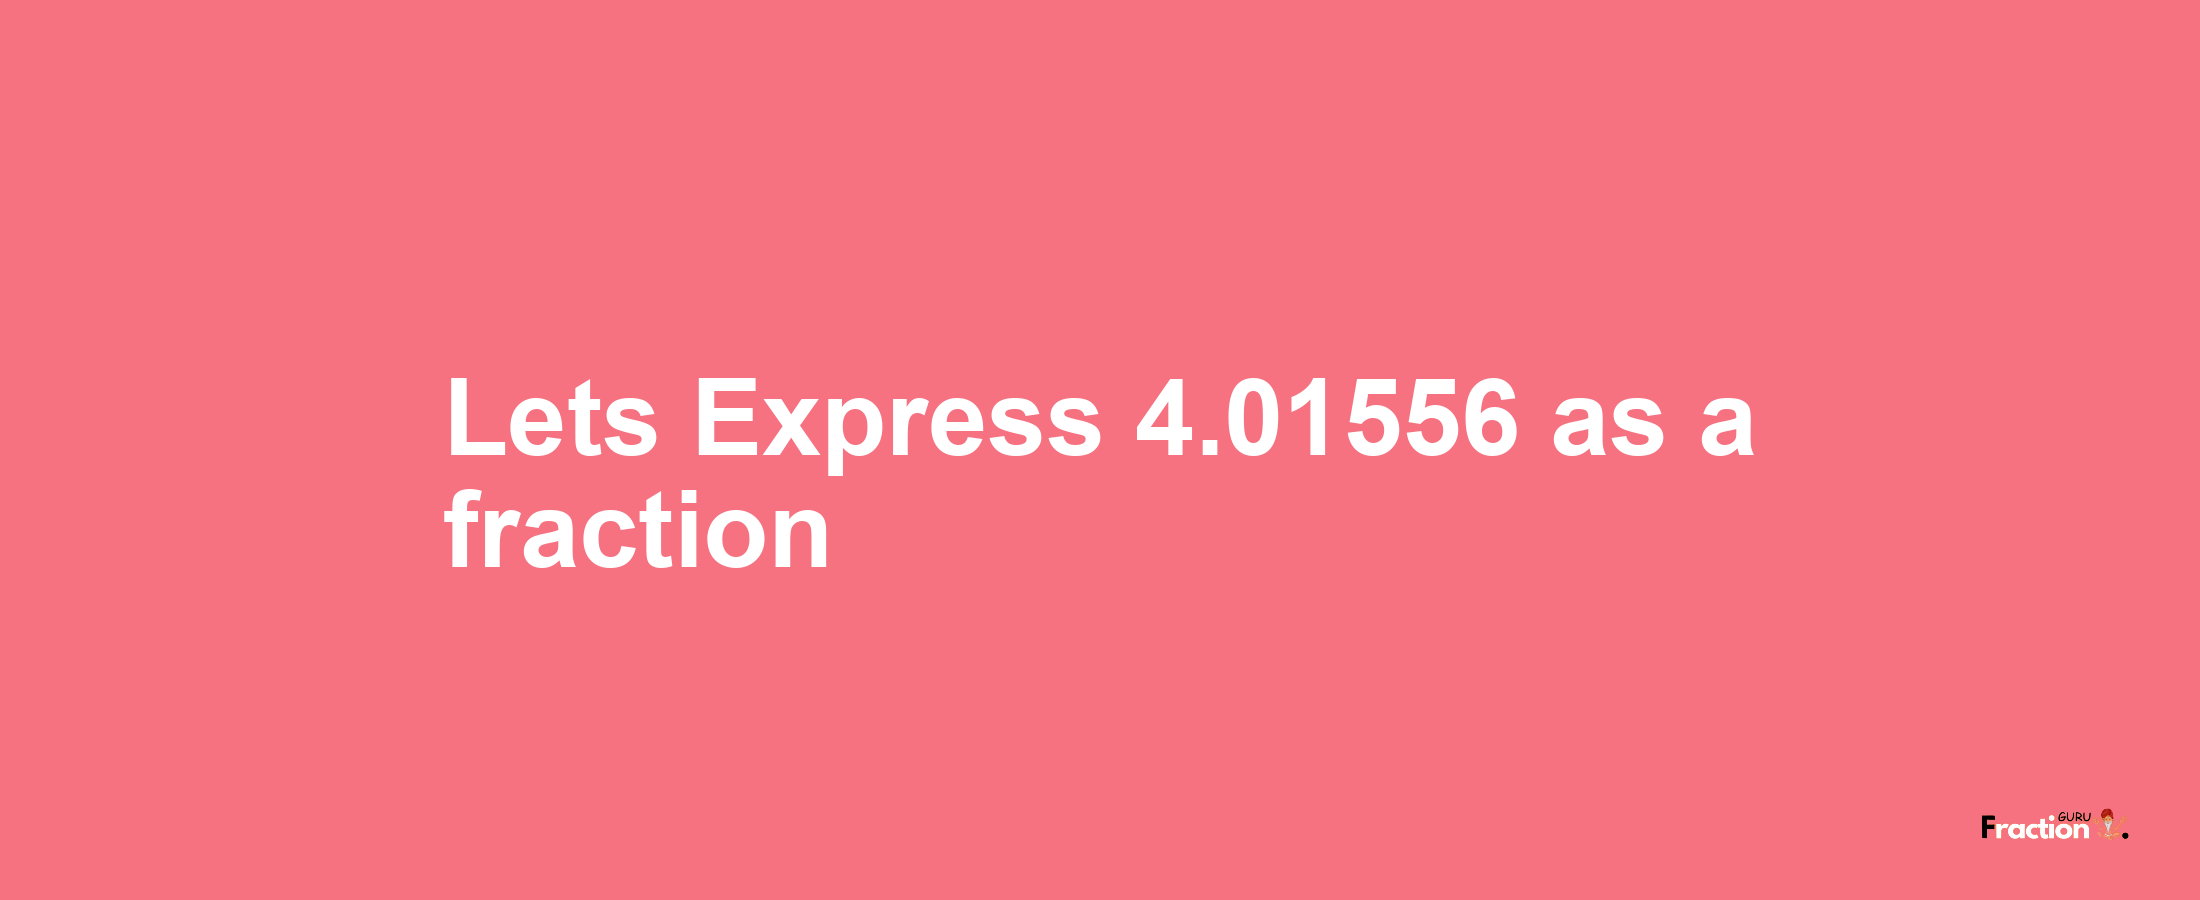 Lets Express 4.01556 as afraction